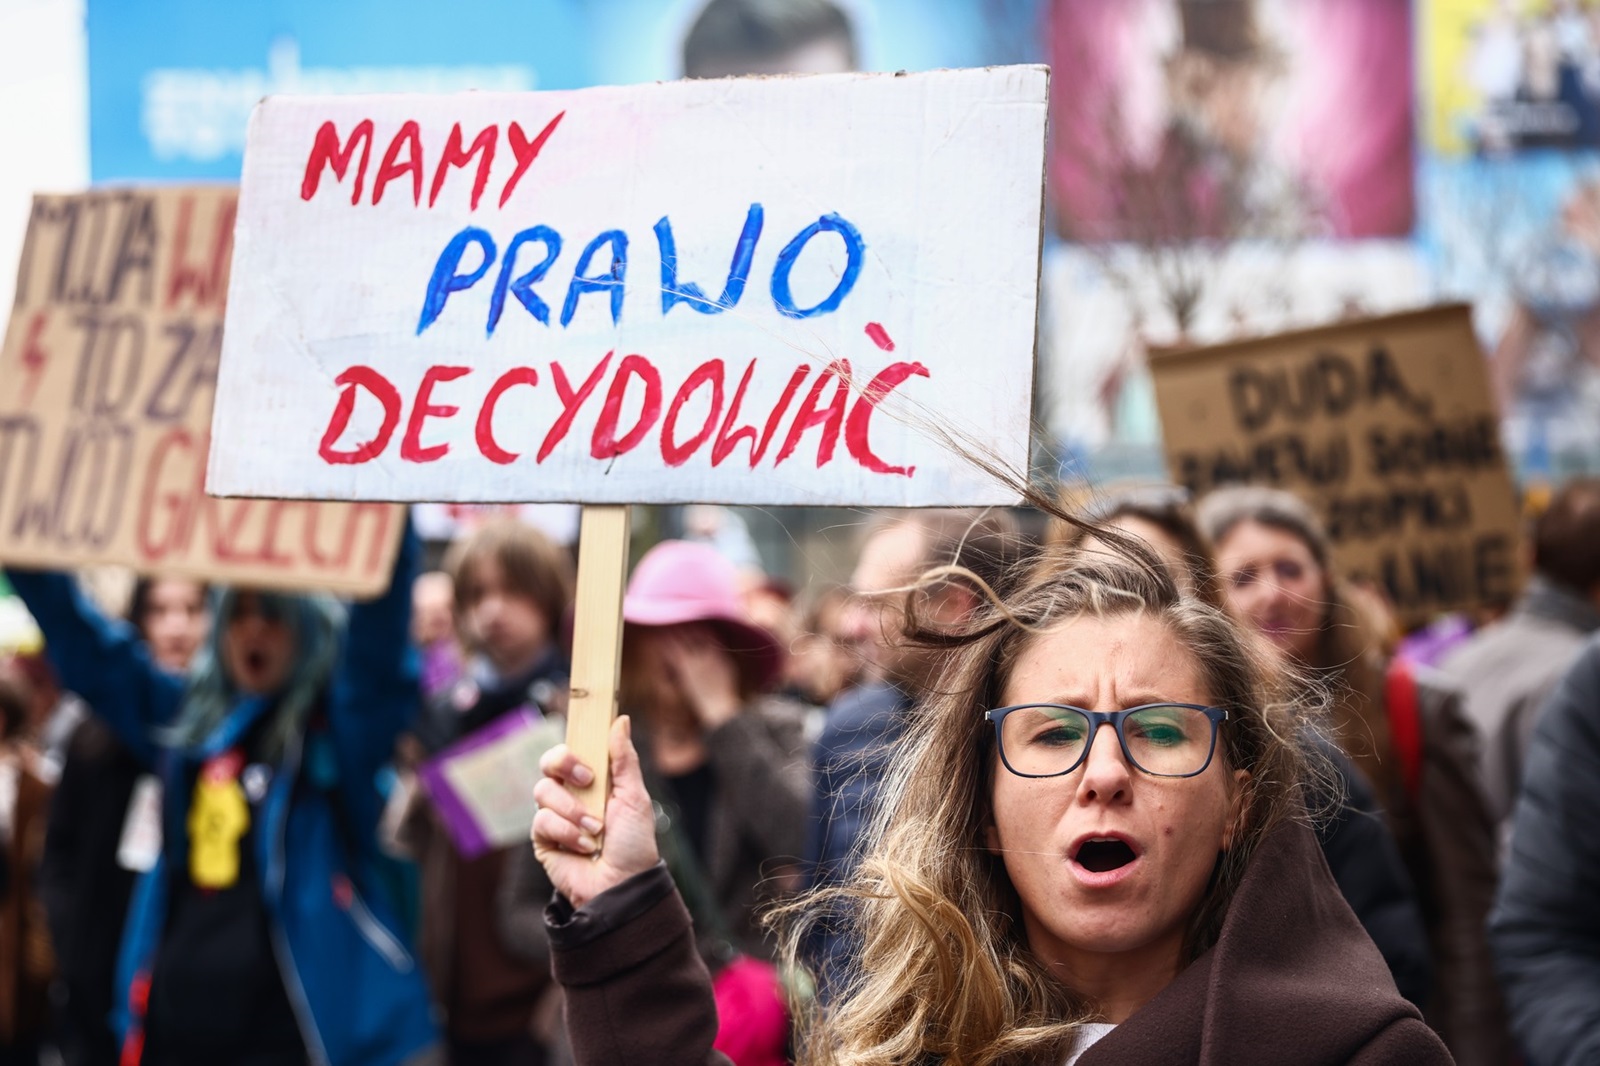 March 10, 2024, Katowice, Poland: A woman holds a banner reading 'We have right to decide' during an annual 'Manifa' march organized by women rights activists  in Katowice, Poland on March 10, 2024. This year's edition was held under a slogan 'Don't fuck up what we had won' with participants demanding abortion rights for women.,Image: 855991490, License: Rights-managed, Restrictions: * France Rights OUT *, Model Release: no, Credit line: Beata Zawrzel / Zuma Press / Profimedia